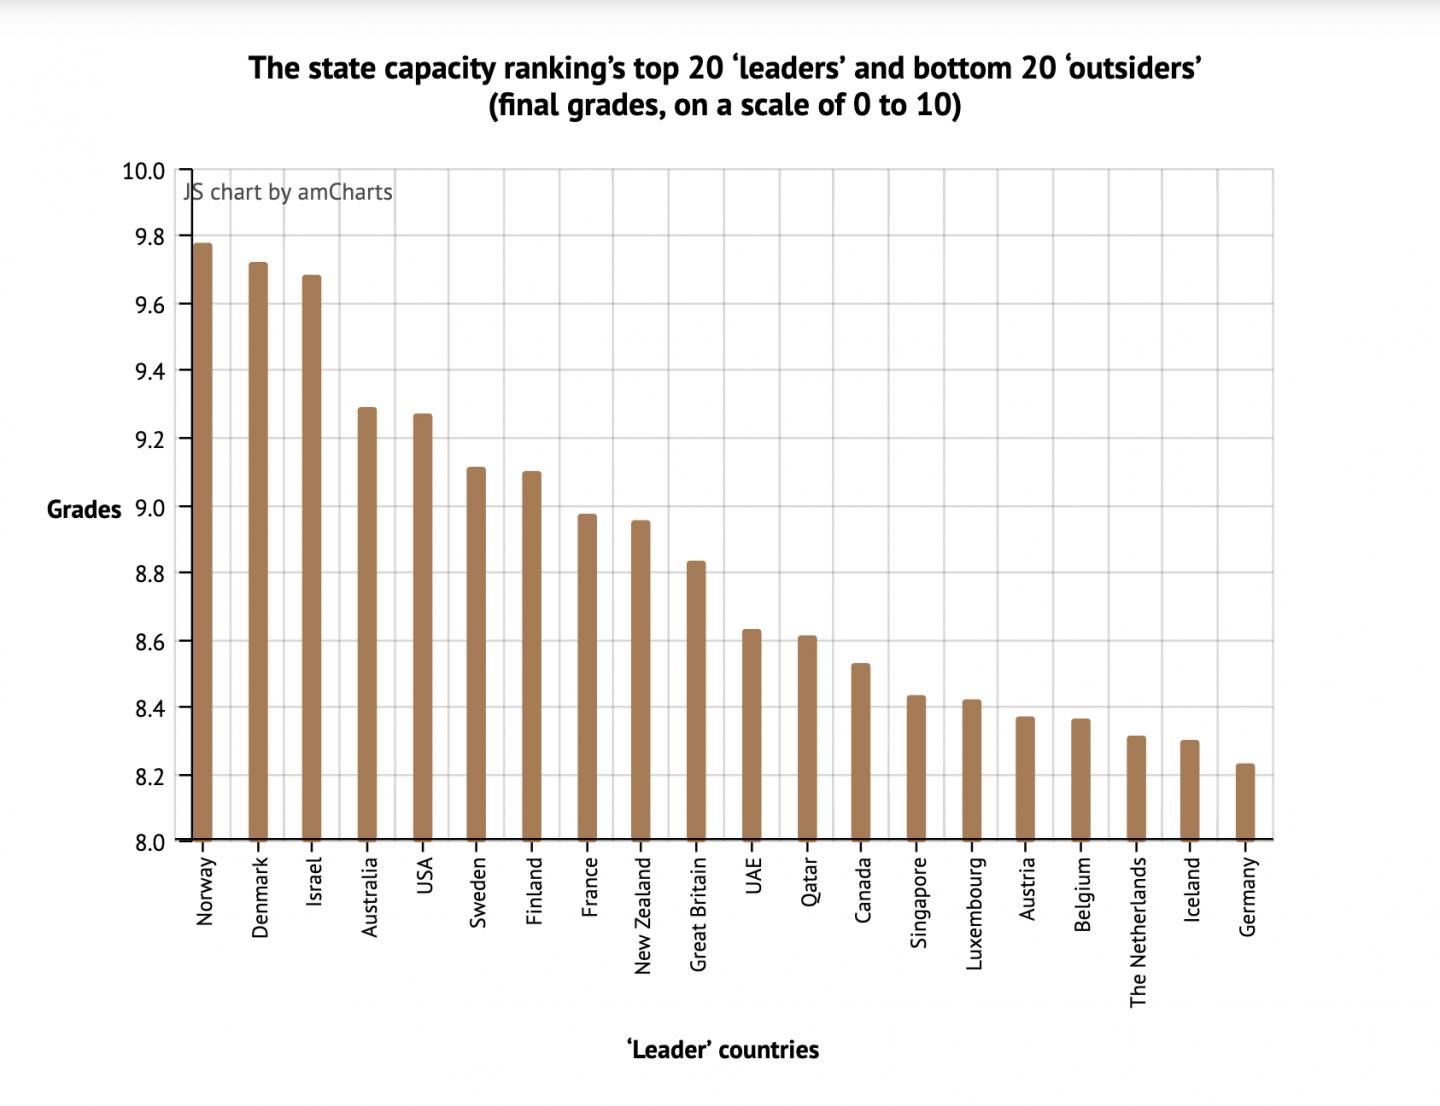 The State Capacity Ranking's Top 20 'leaders'